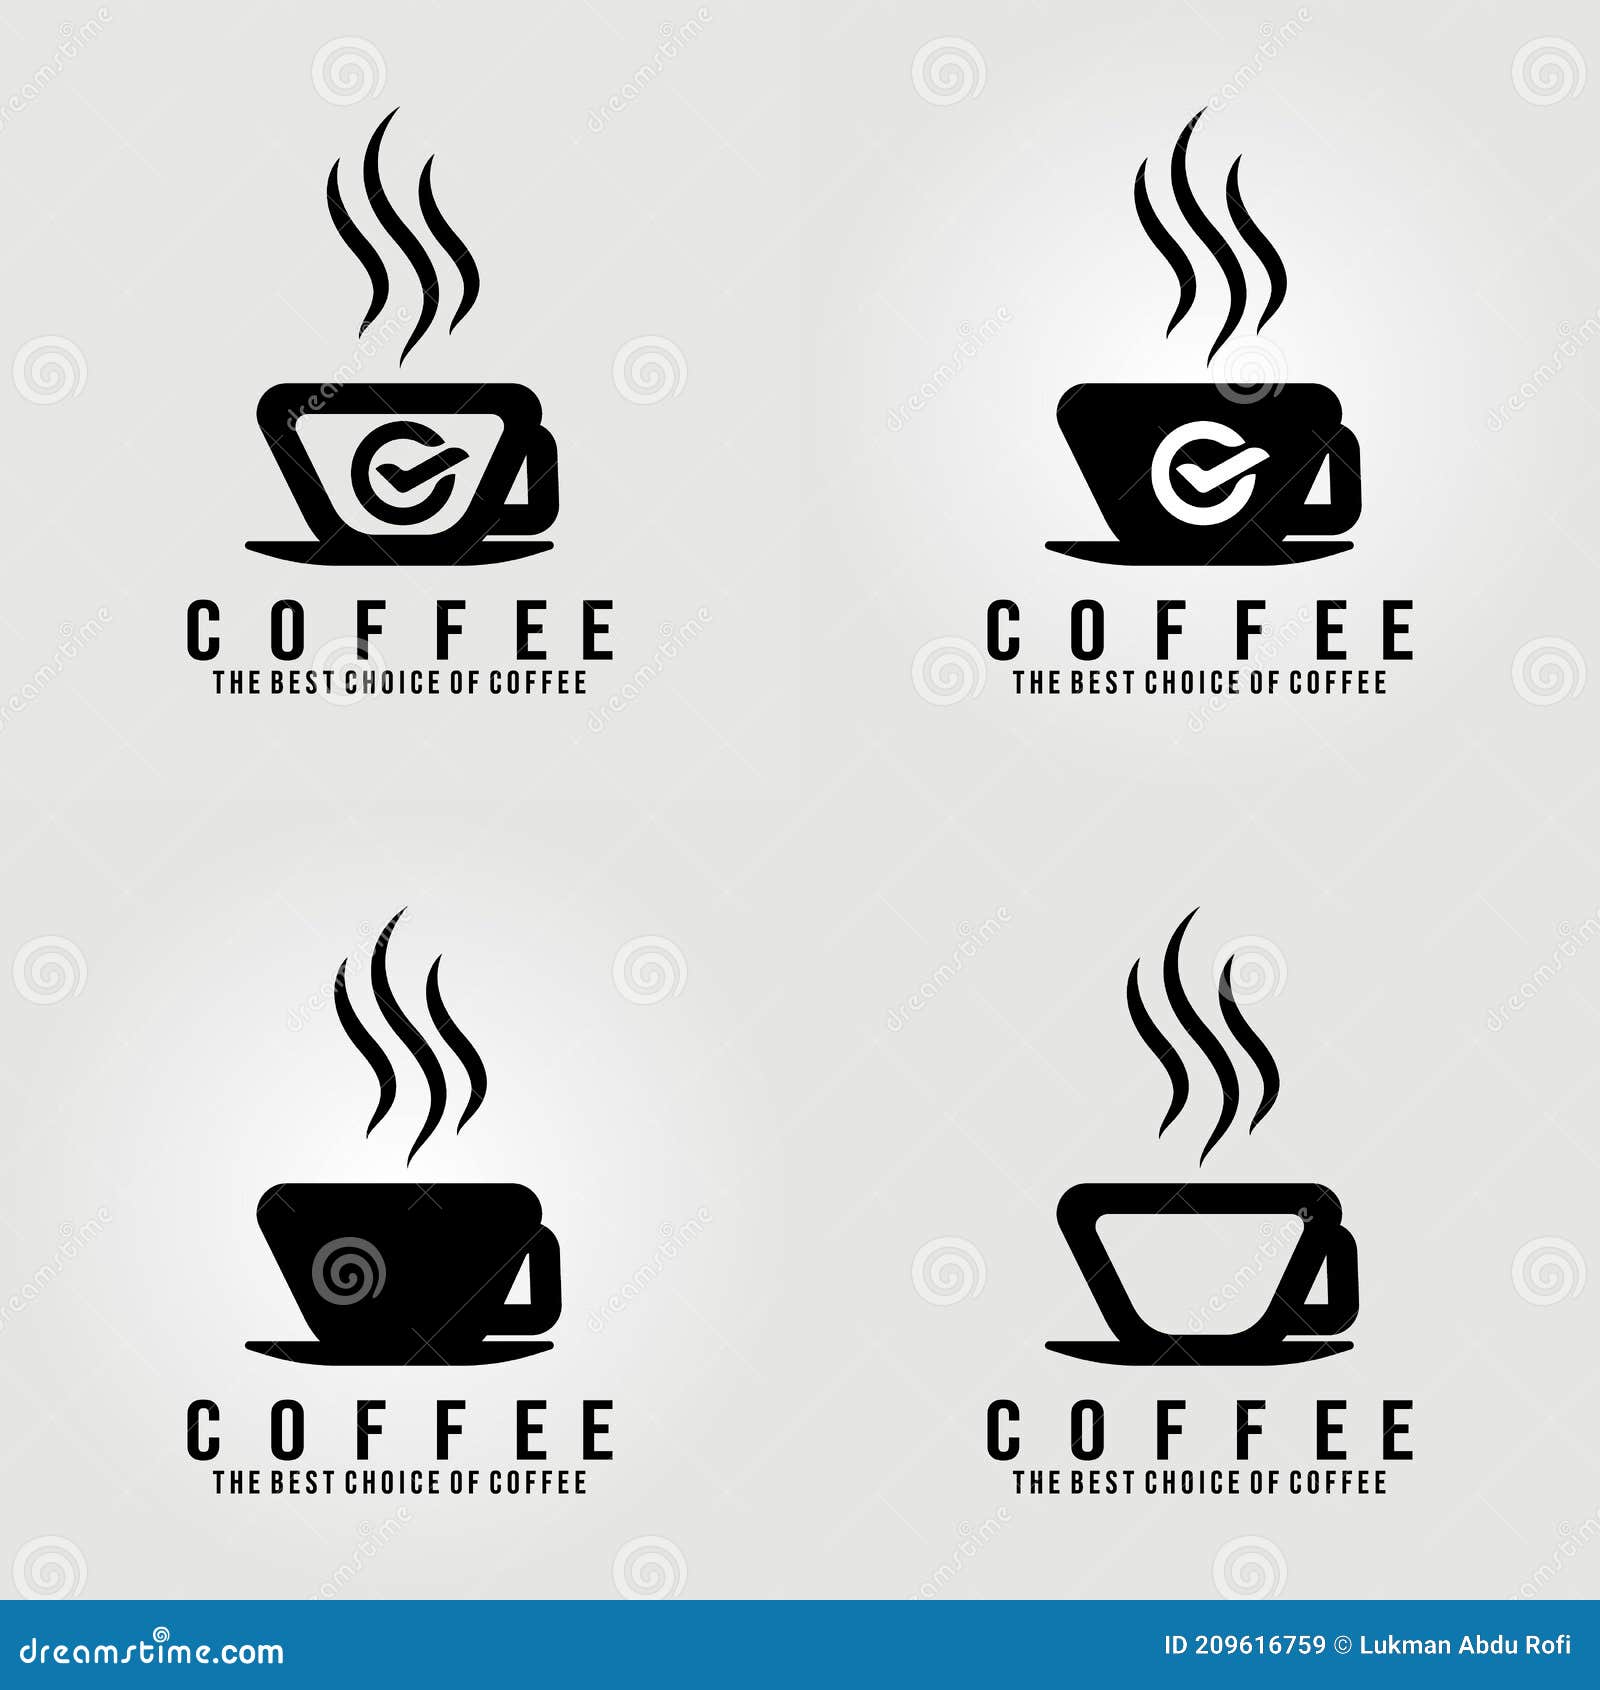 A Cup of Coffee, Coffee Shop Logo , Clever Vector Illustration ...